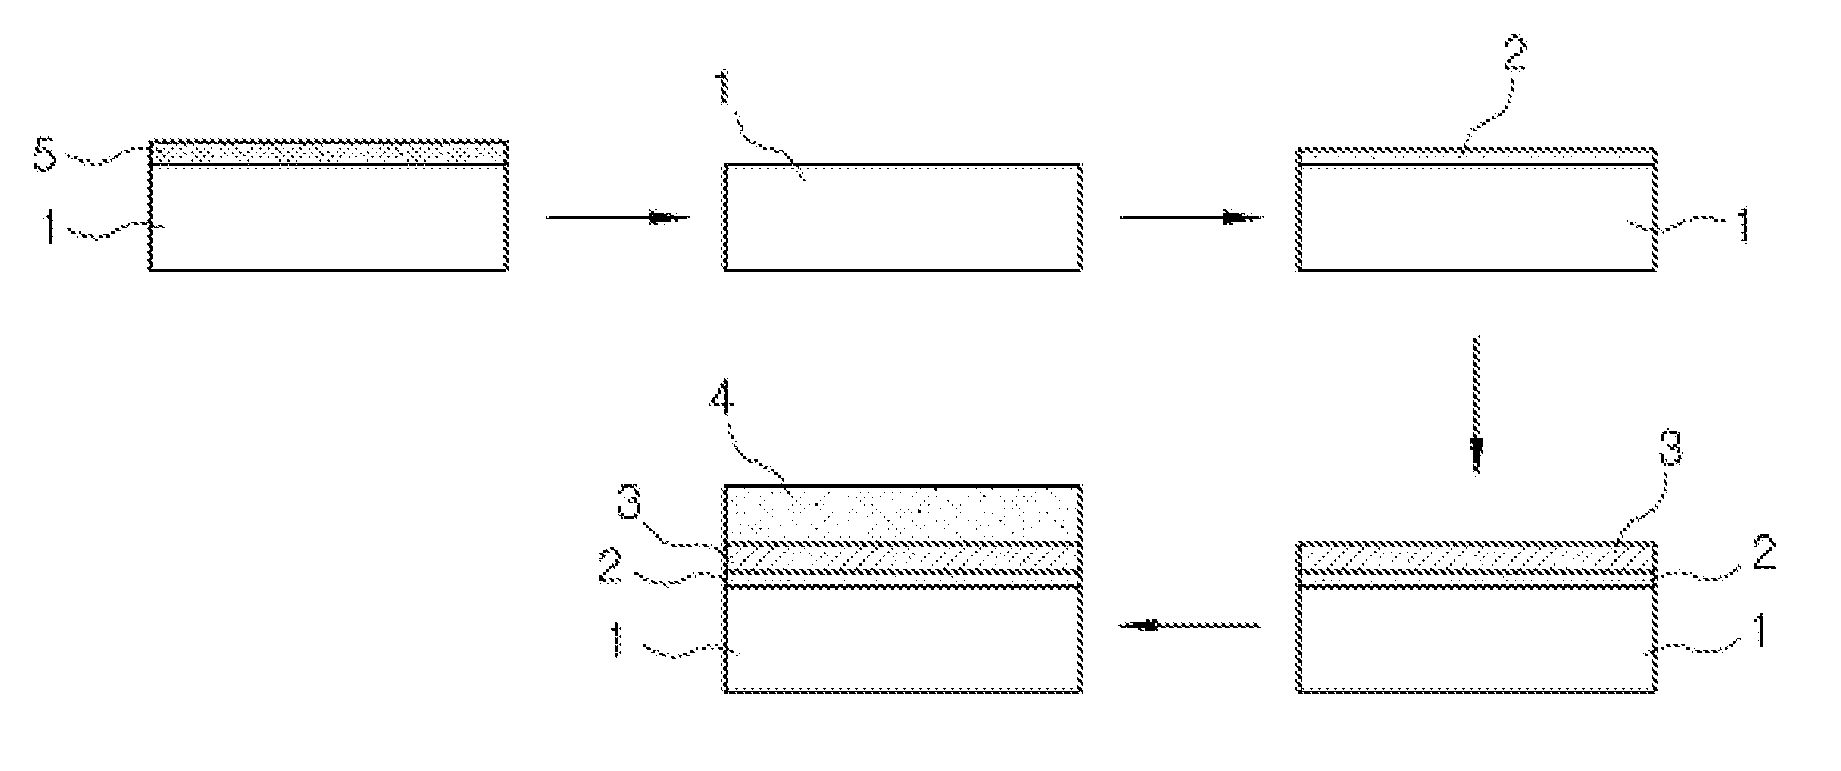 Method of depositing nanolaminate film for non-volatile floating gate memory devices by atomic layer deposition